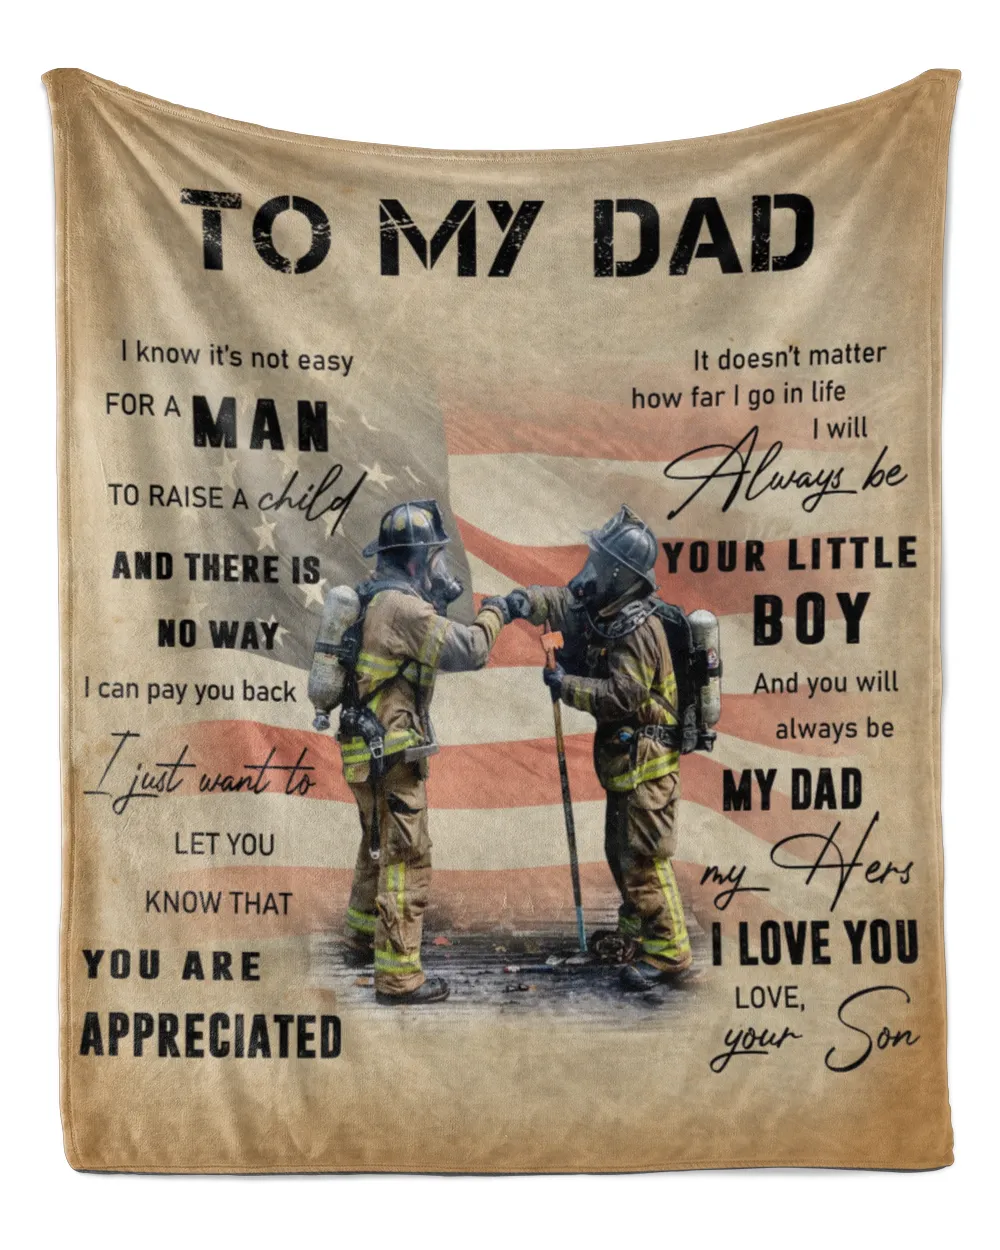 Father's Day Gifts, To My Dad Firefighter Papa Pop Daddy From Daughter Quilt Fleece Blanket